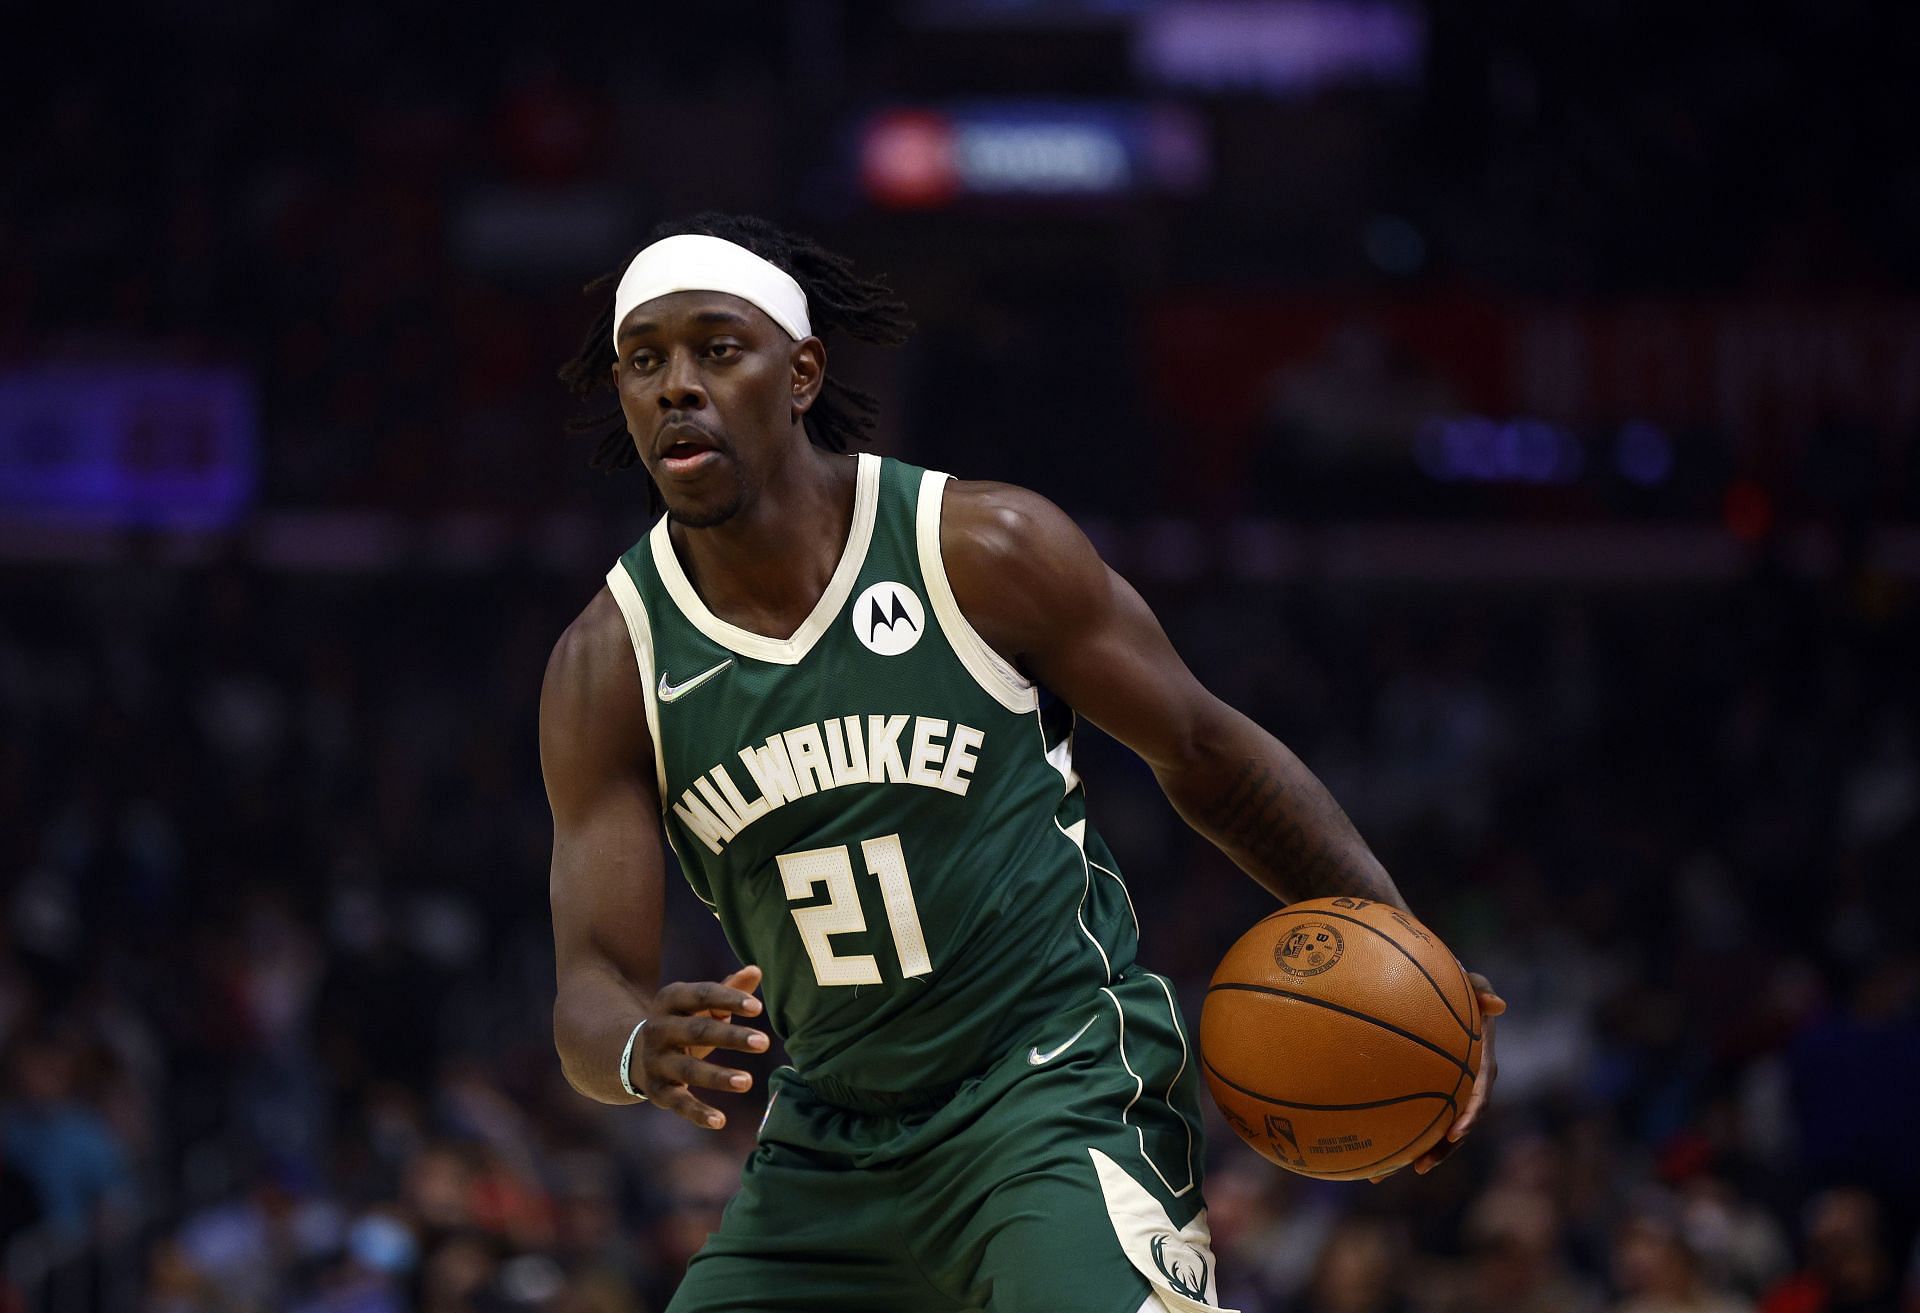 Jrue Holiday will be crucial on both ends of the floor for the Bucks